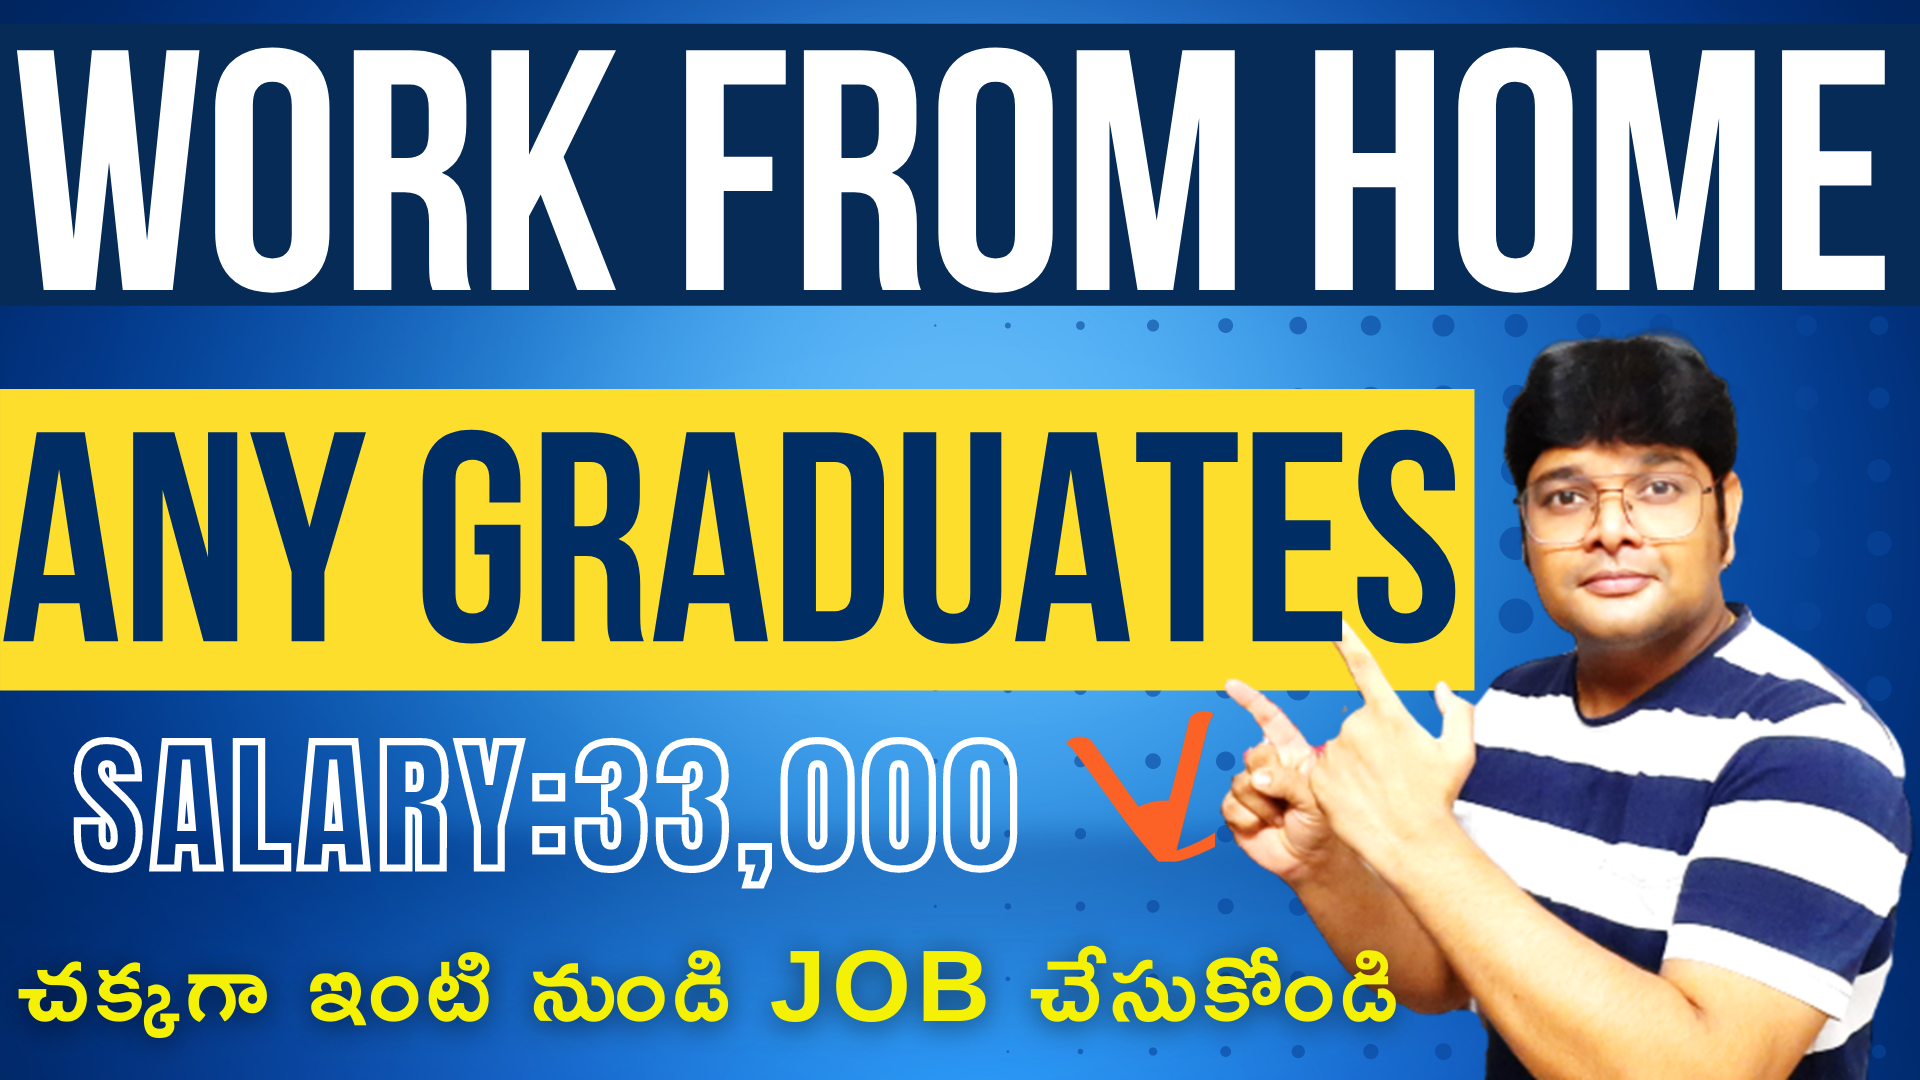 Work from Home jobs in Telugu Vedantu Work from home jobs Latest jobs 2022 V the Techee